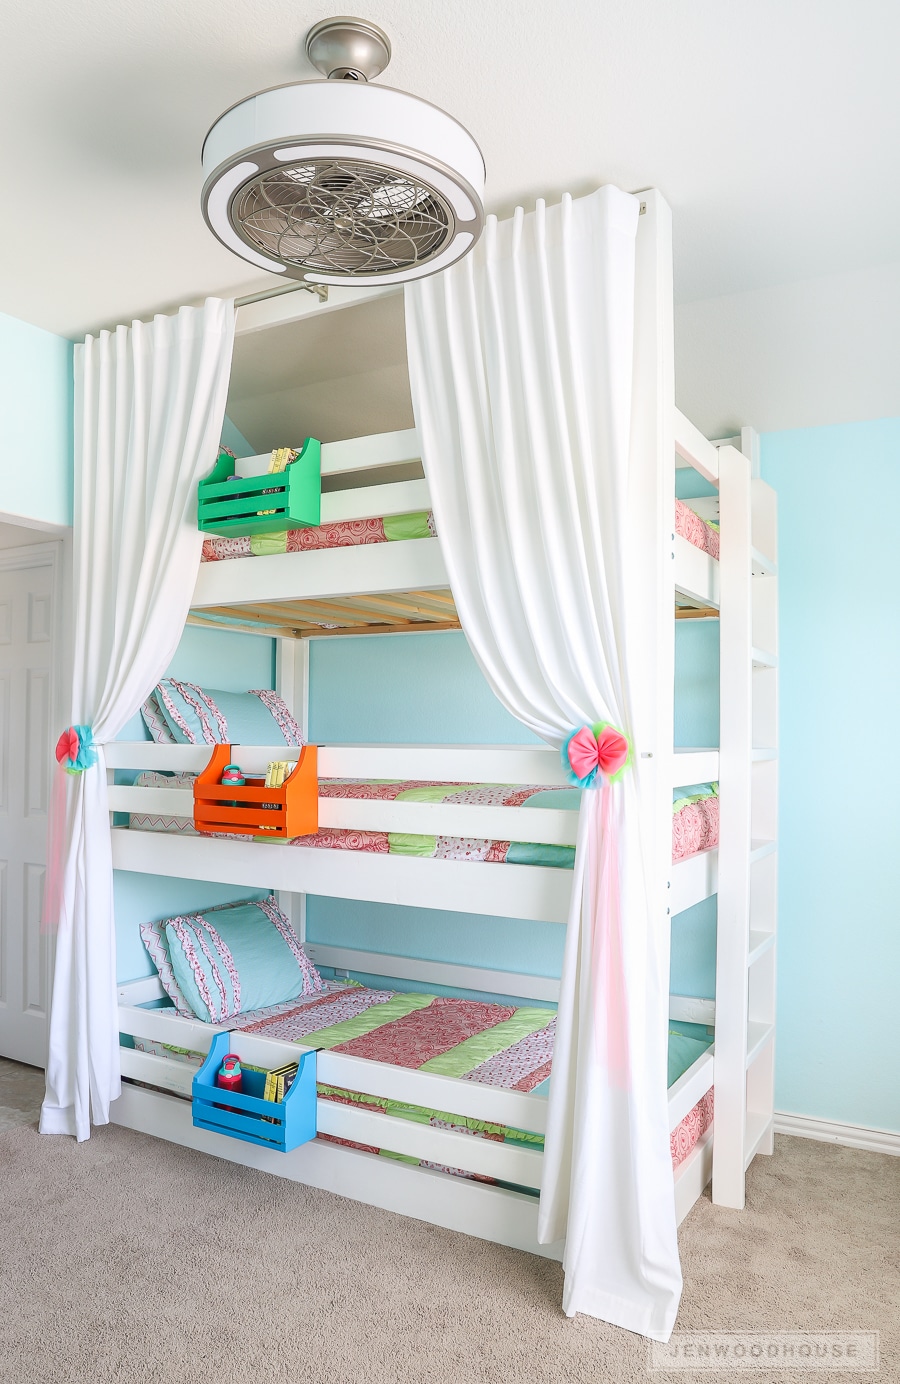 How To Build A Diy Triple Bunk Bed, How To Build Bunk Beds With Drawers